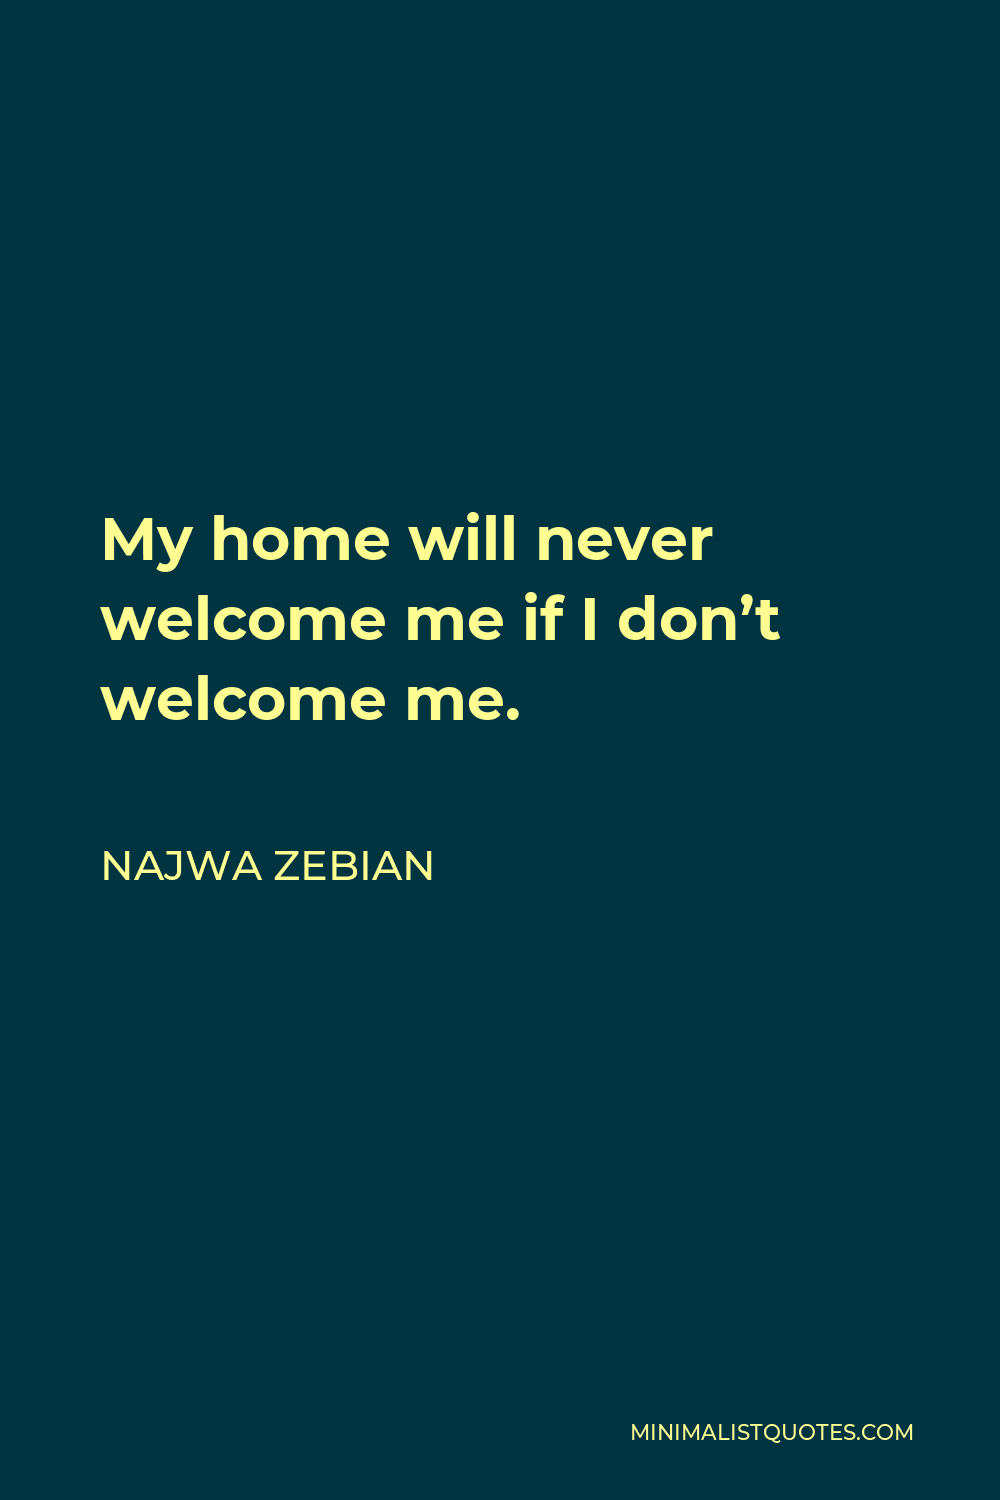 Najwa Zebian Quote - My home will never welcome me if I don’t welcome me.